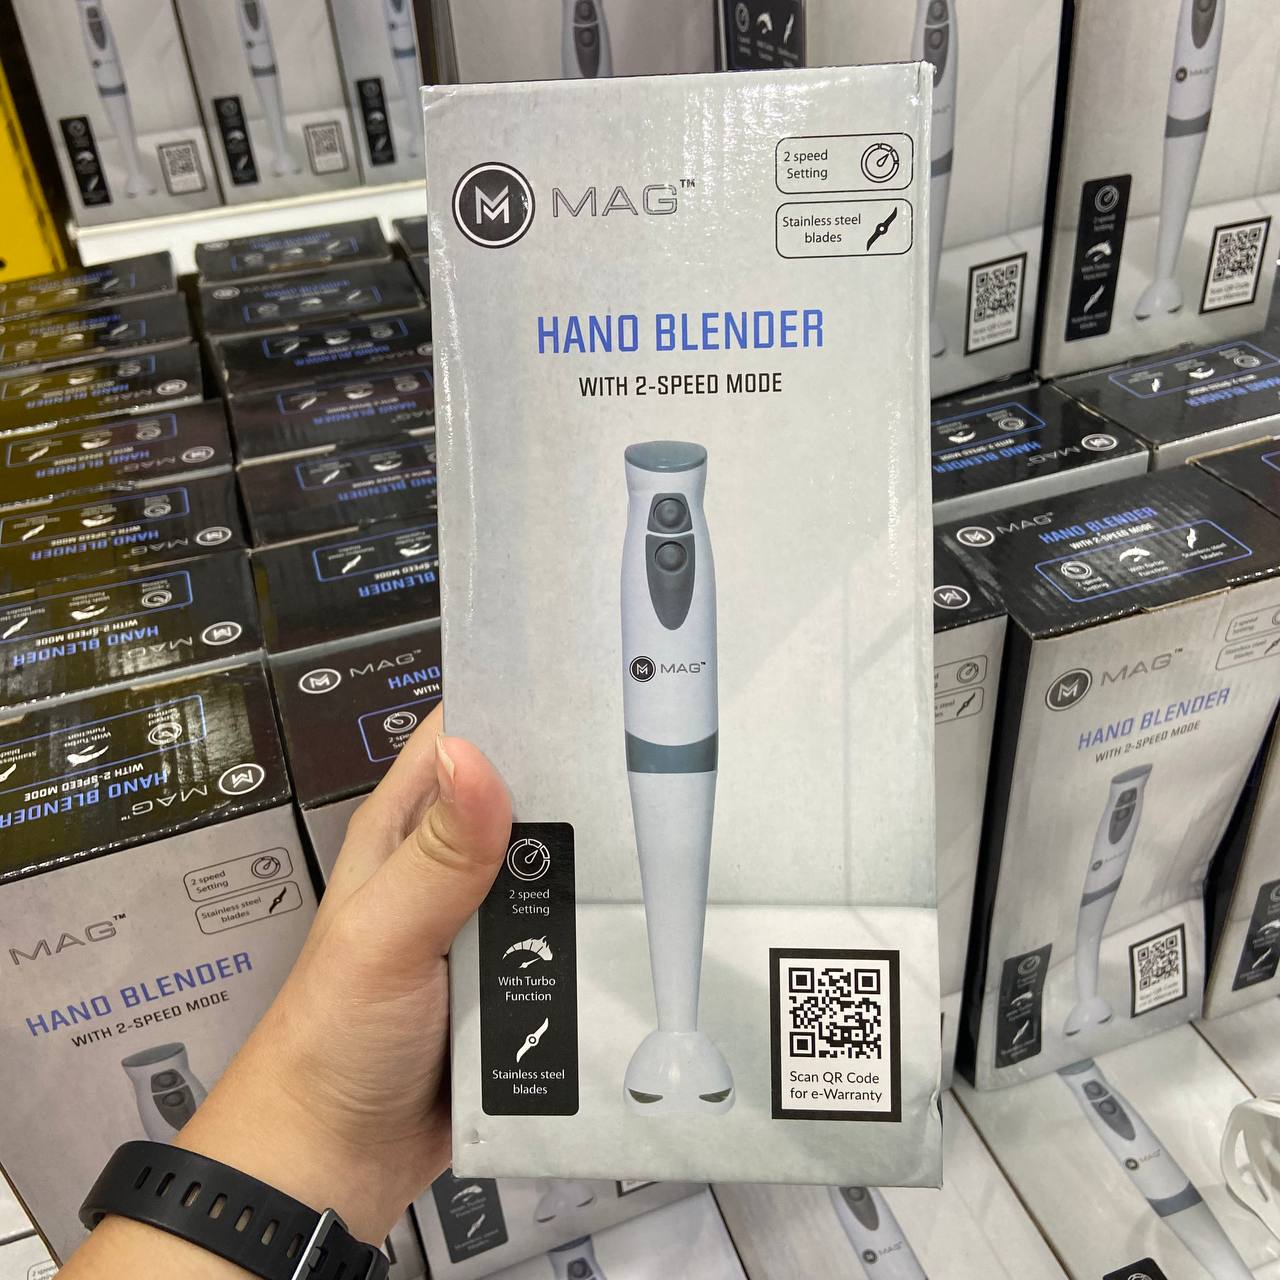 hand blender in a box